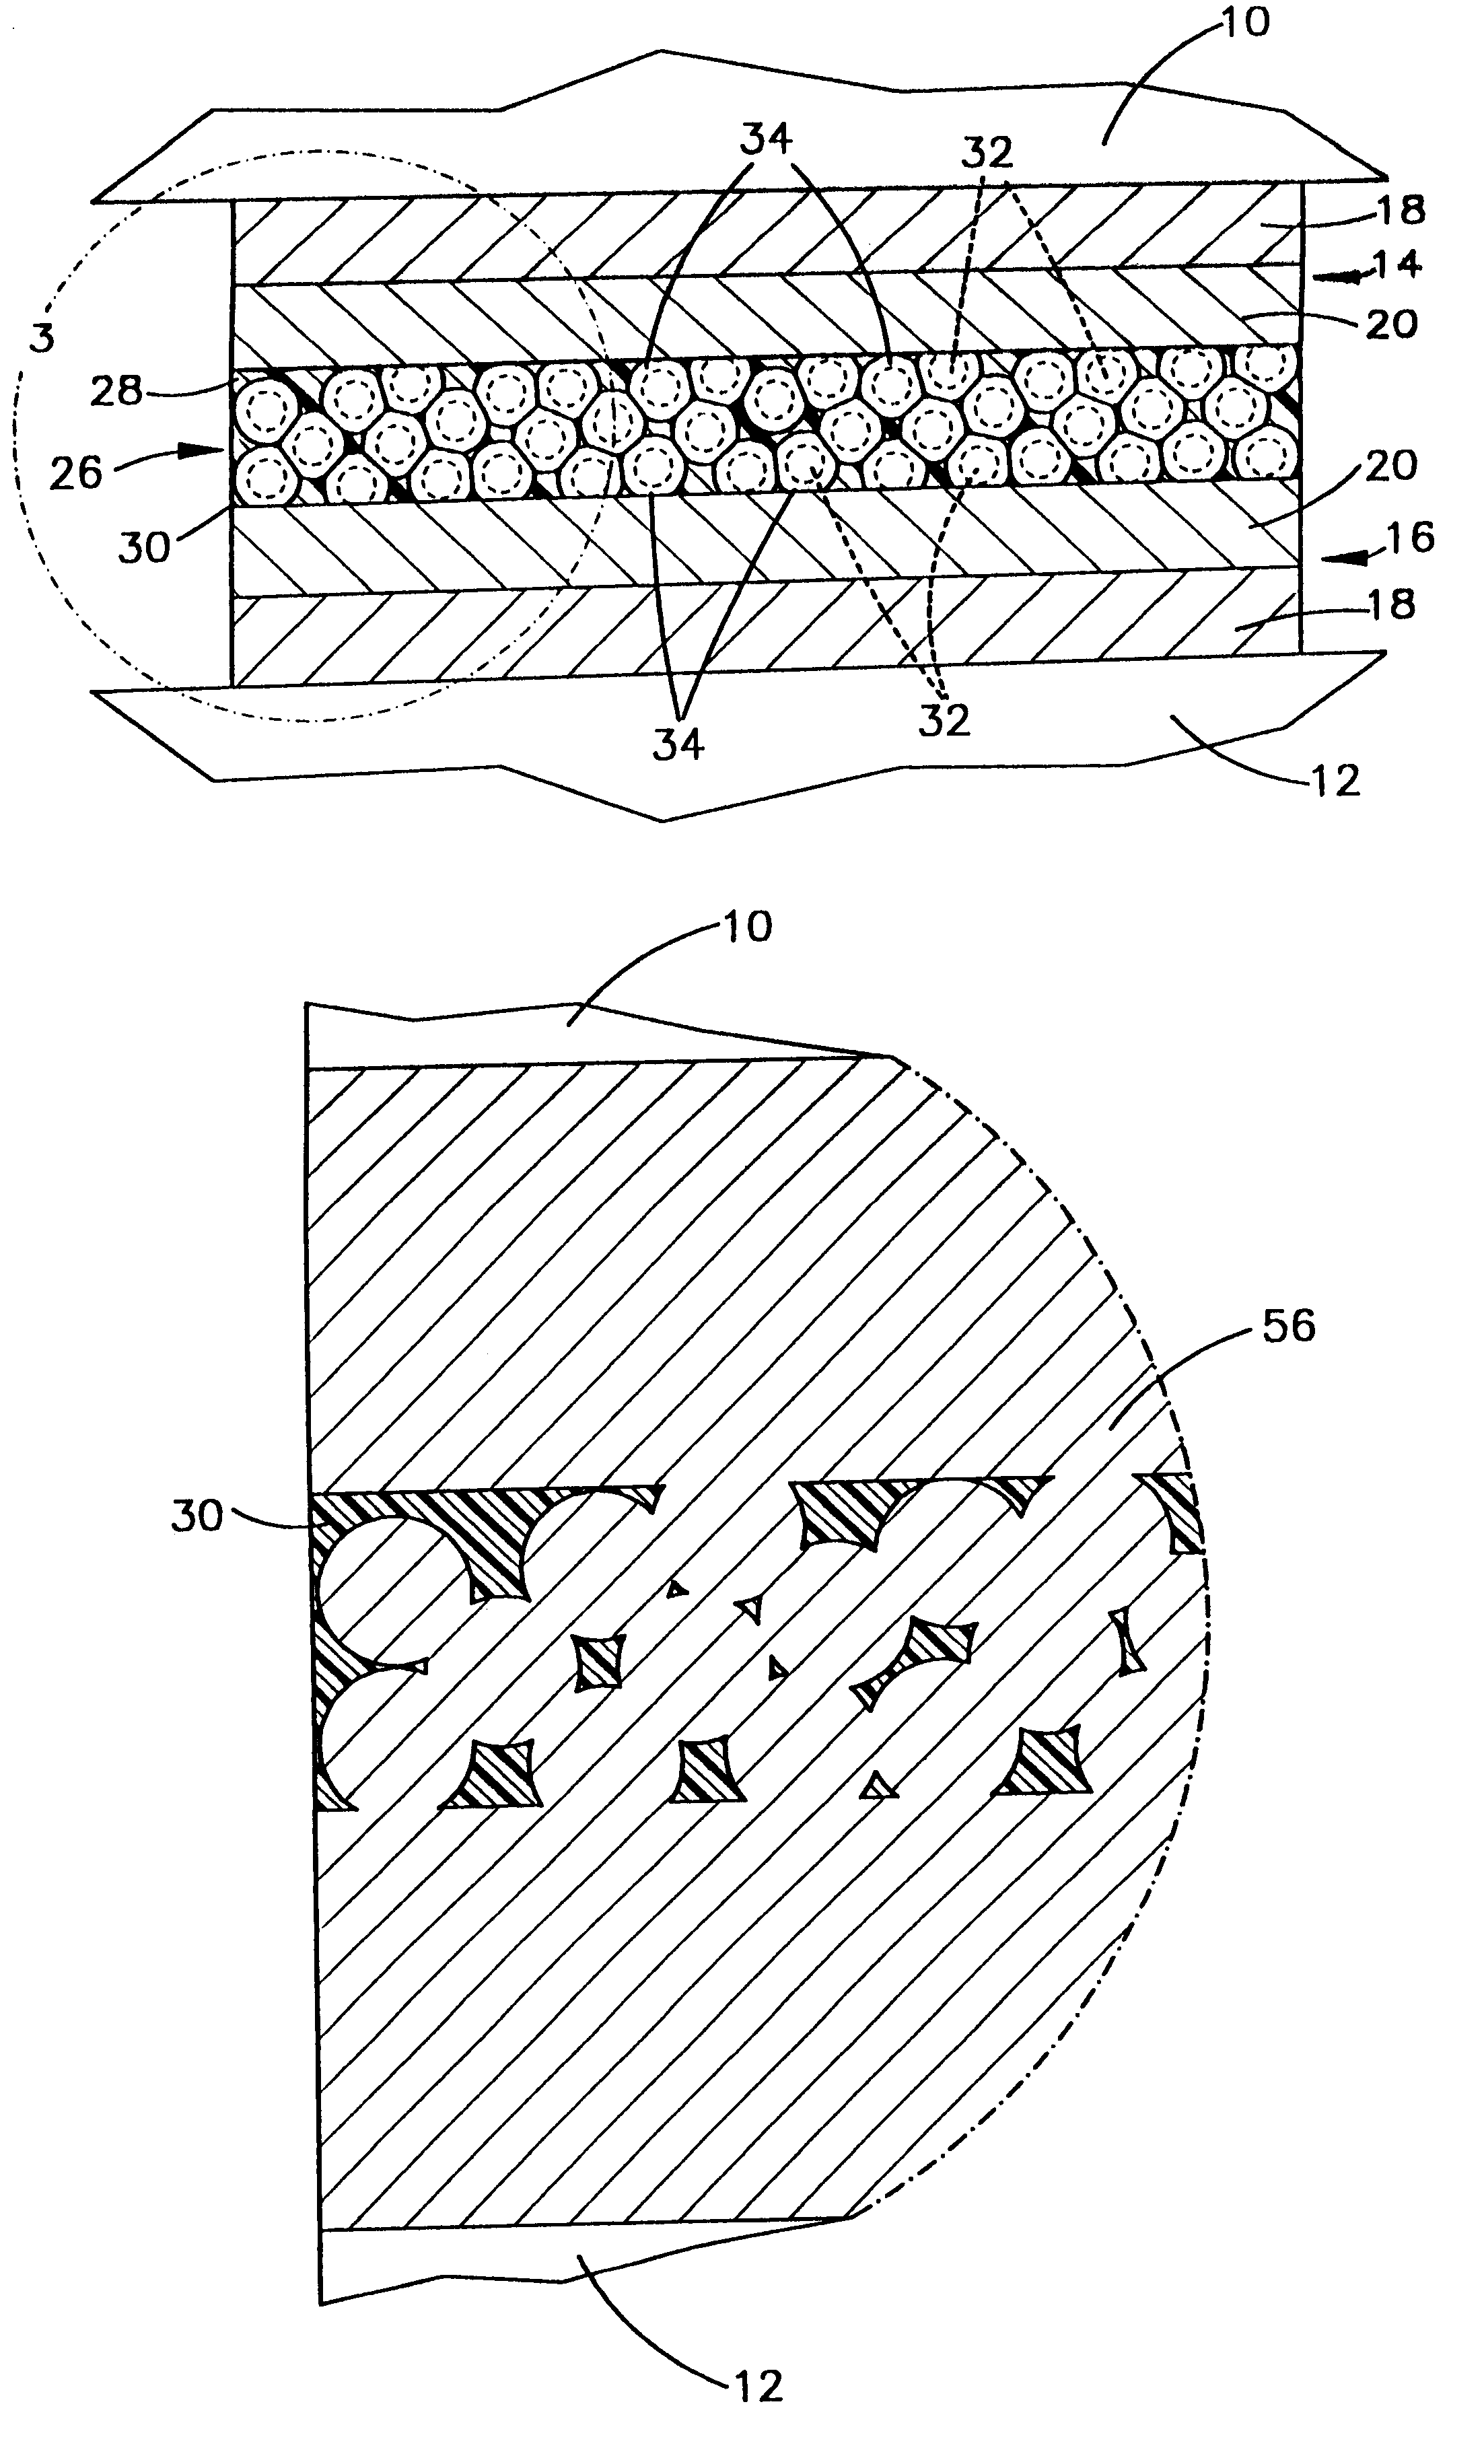 Polymer with transient liquid phase bondable particles